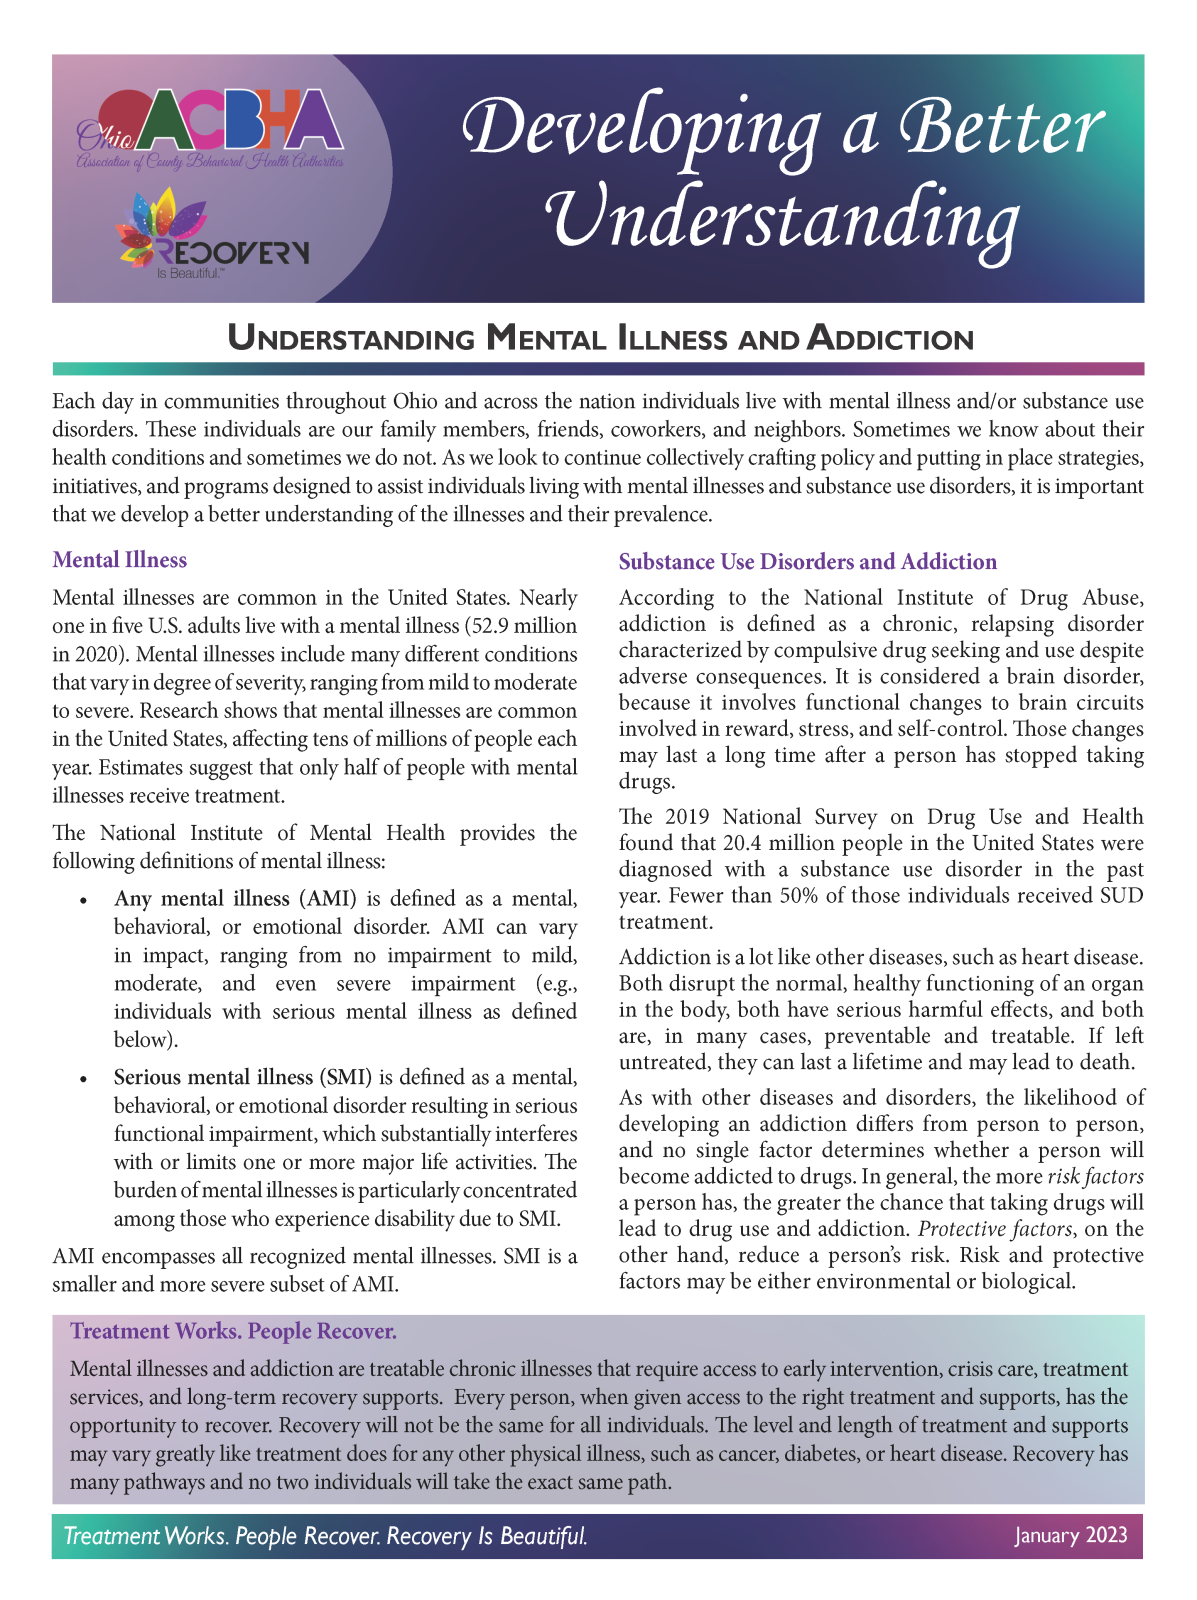 January_2023-Understanding_Mental_Illness_and_Addiction_Page_1